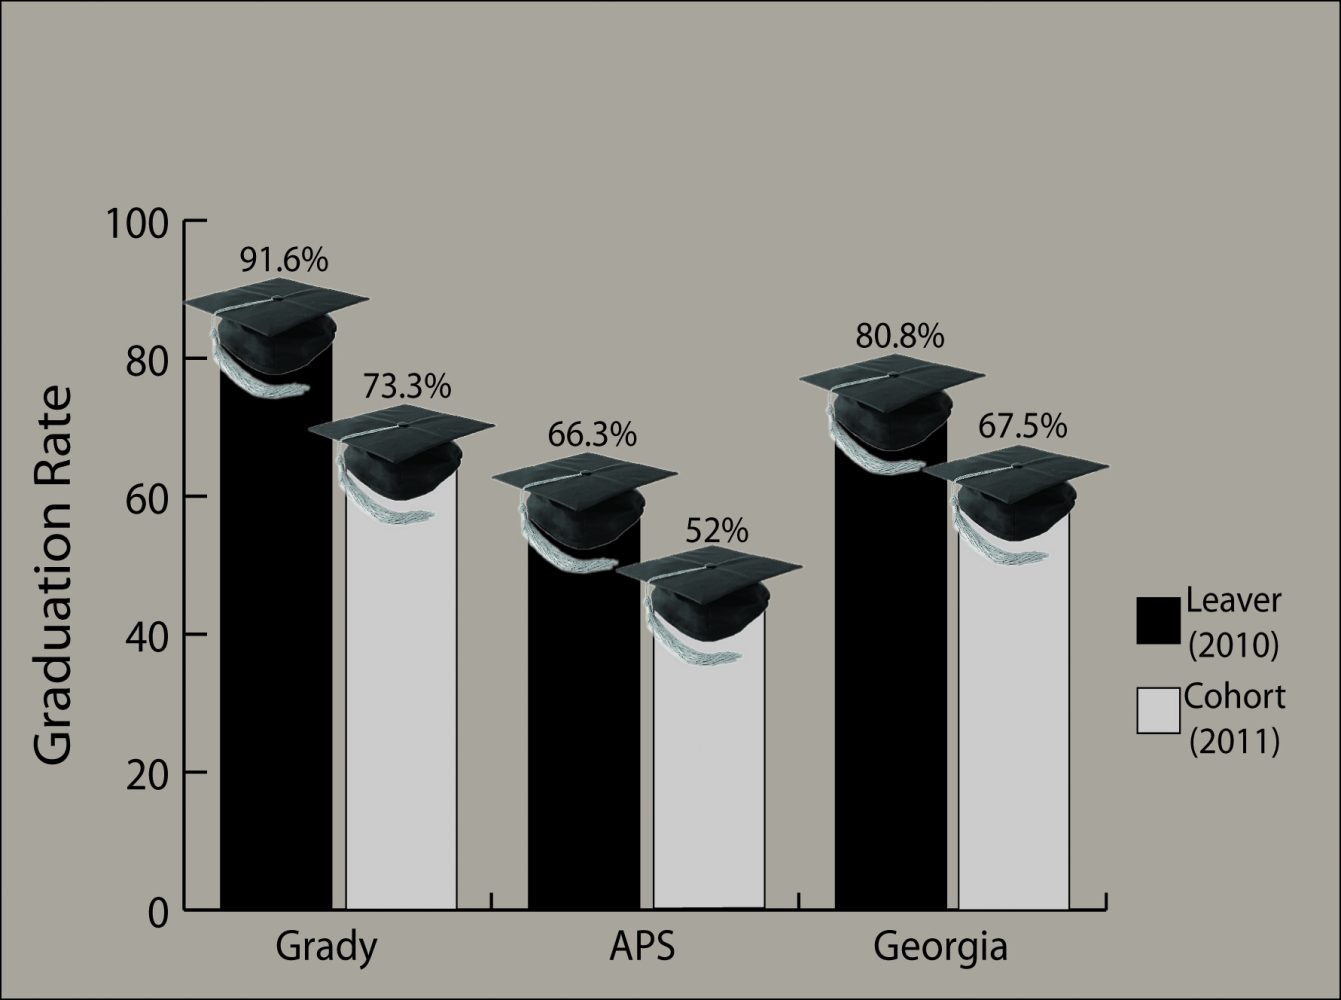 While+Gradys+graduation+rate+has+been+higher+than+the+average+graduation+rate+in+APS+and+across+Georgia%2C+the+graduation+rate+plummeted+for+the+class+of+2011%2C+when+it+was+calculated+with+the+Cohort+rate+instead+of+the+Leaver+rate.